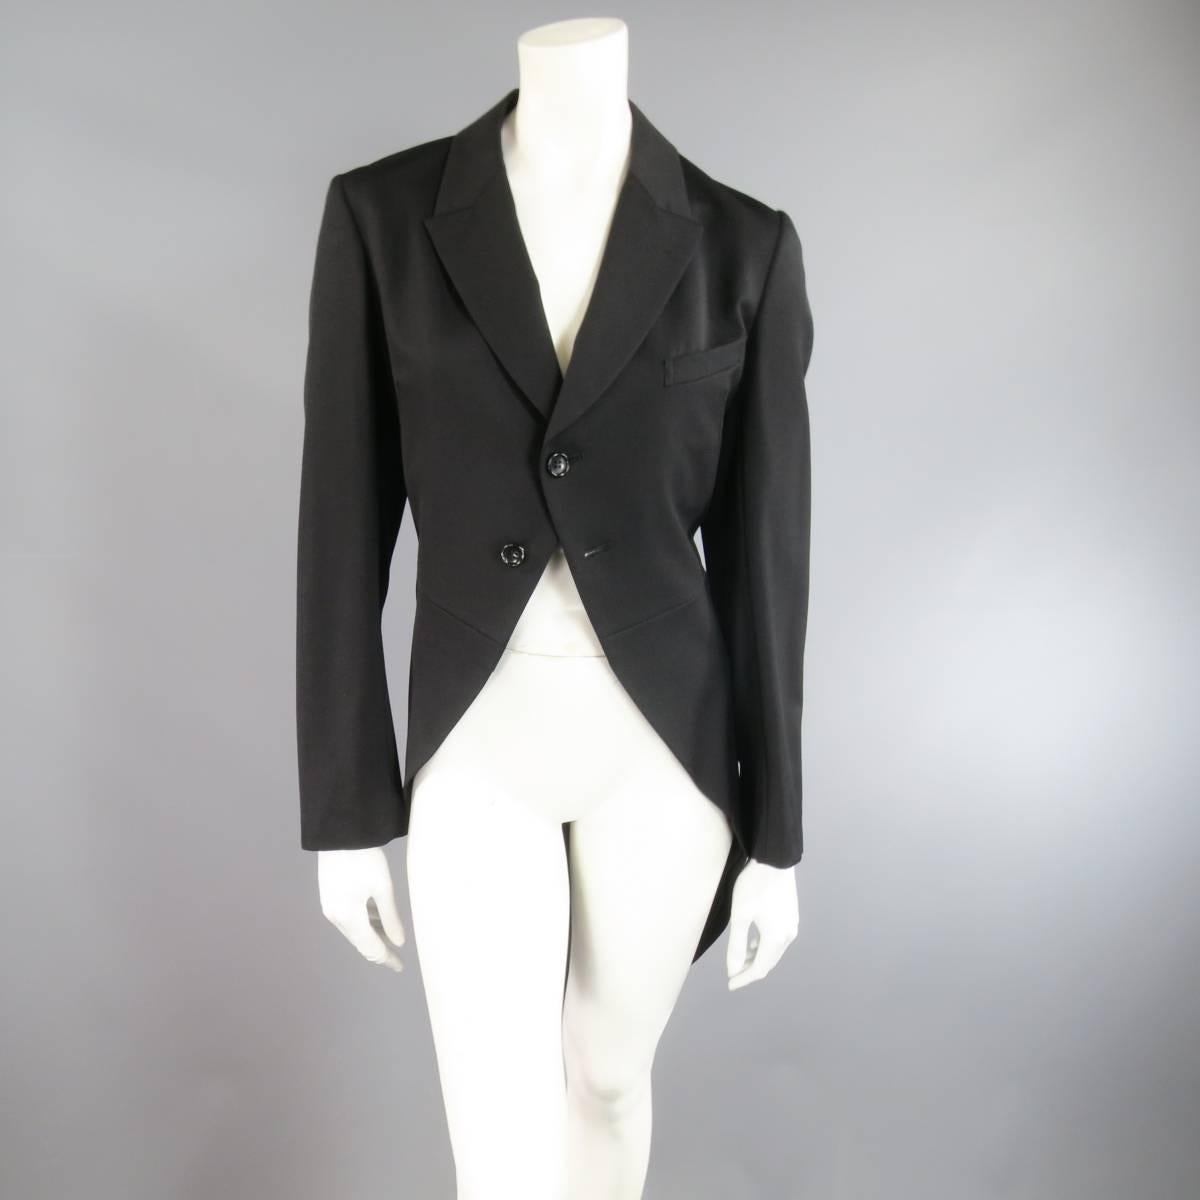 This gorgeous COMME DES GARCONS casual tuxedo inspired jacket comes in a light weight black wool twill and features a small peak lapel, two button closure, and high low coat tails hem. Made in Japan. Retails at $1285.00.
 
Brand New With